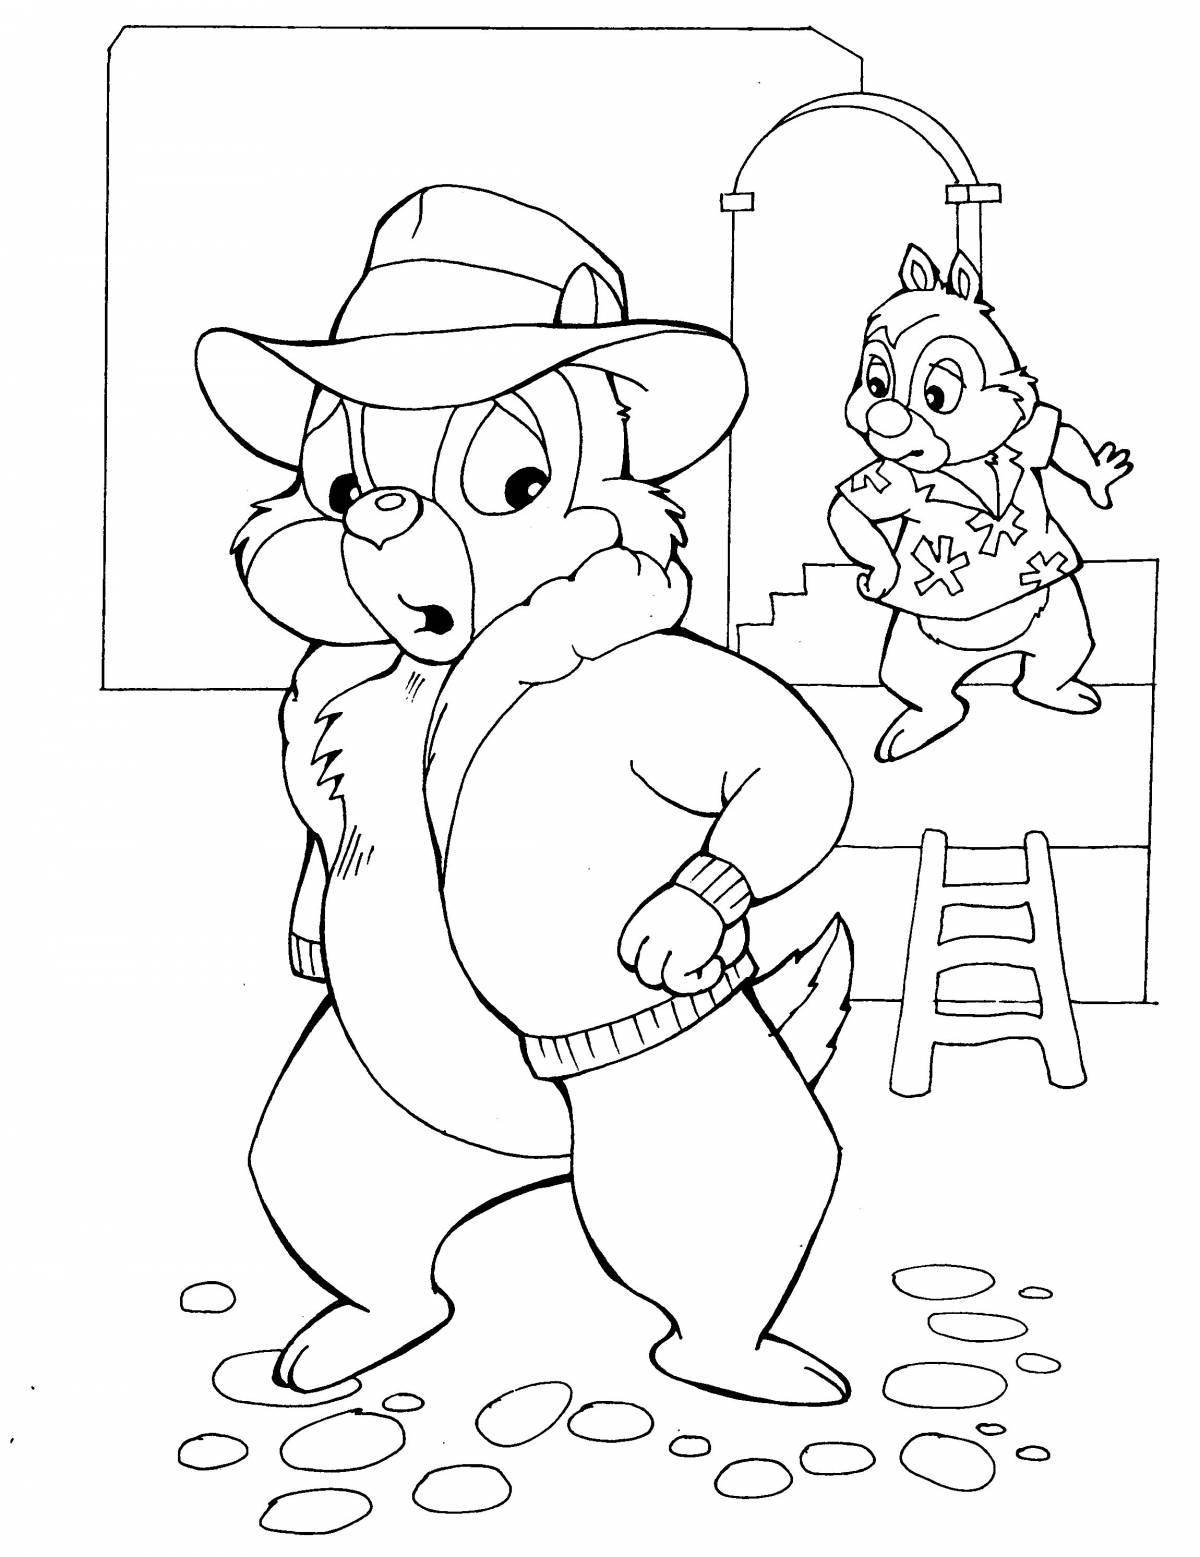 Playful chip and dale coloring page